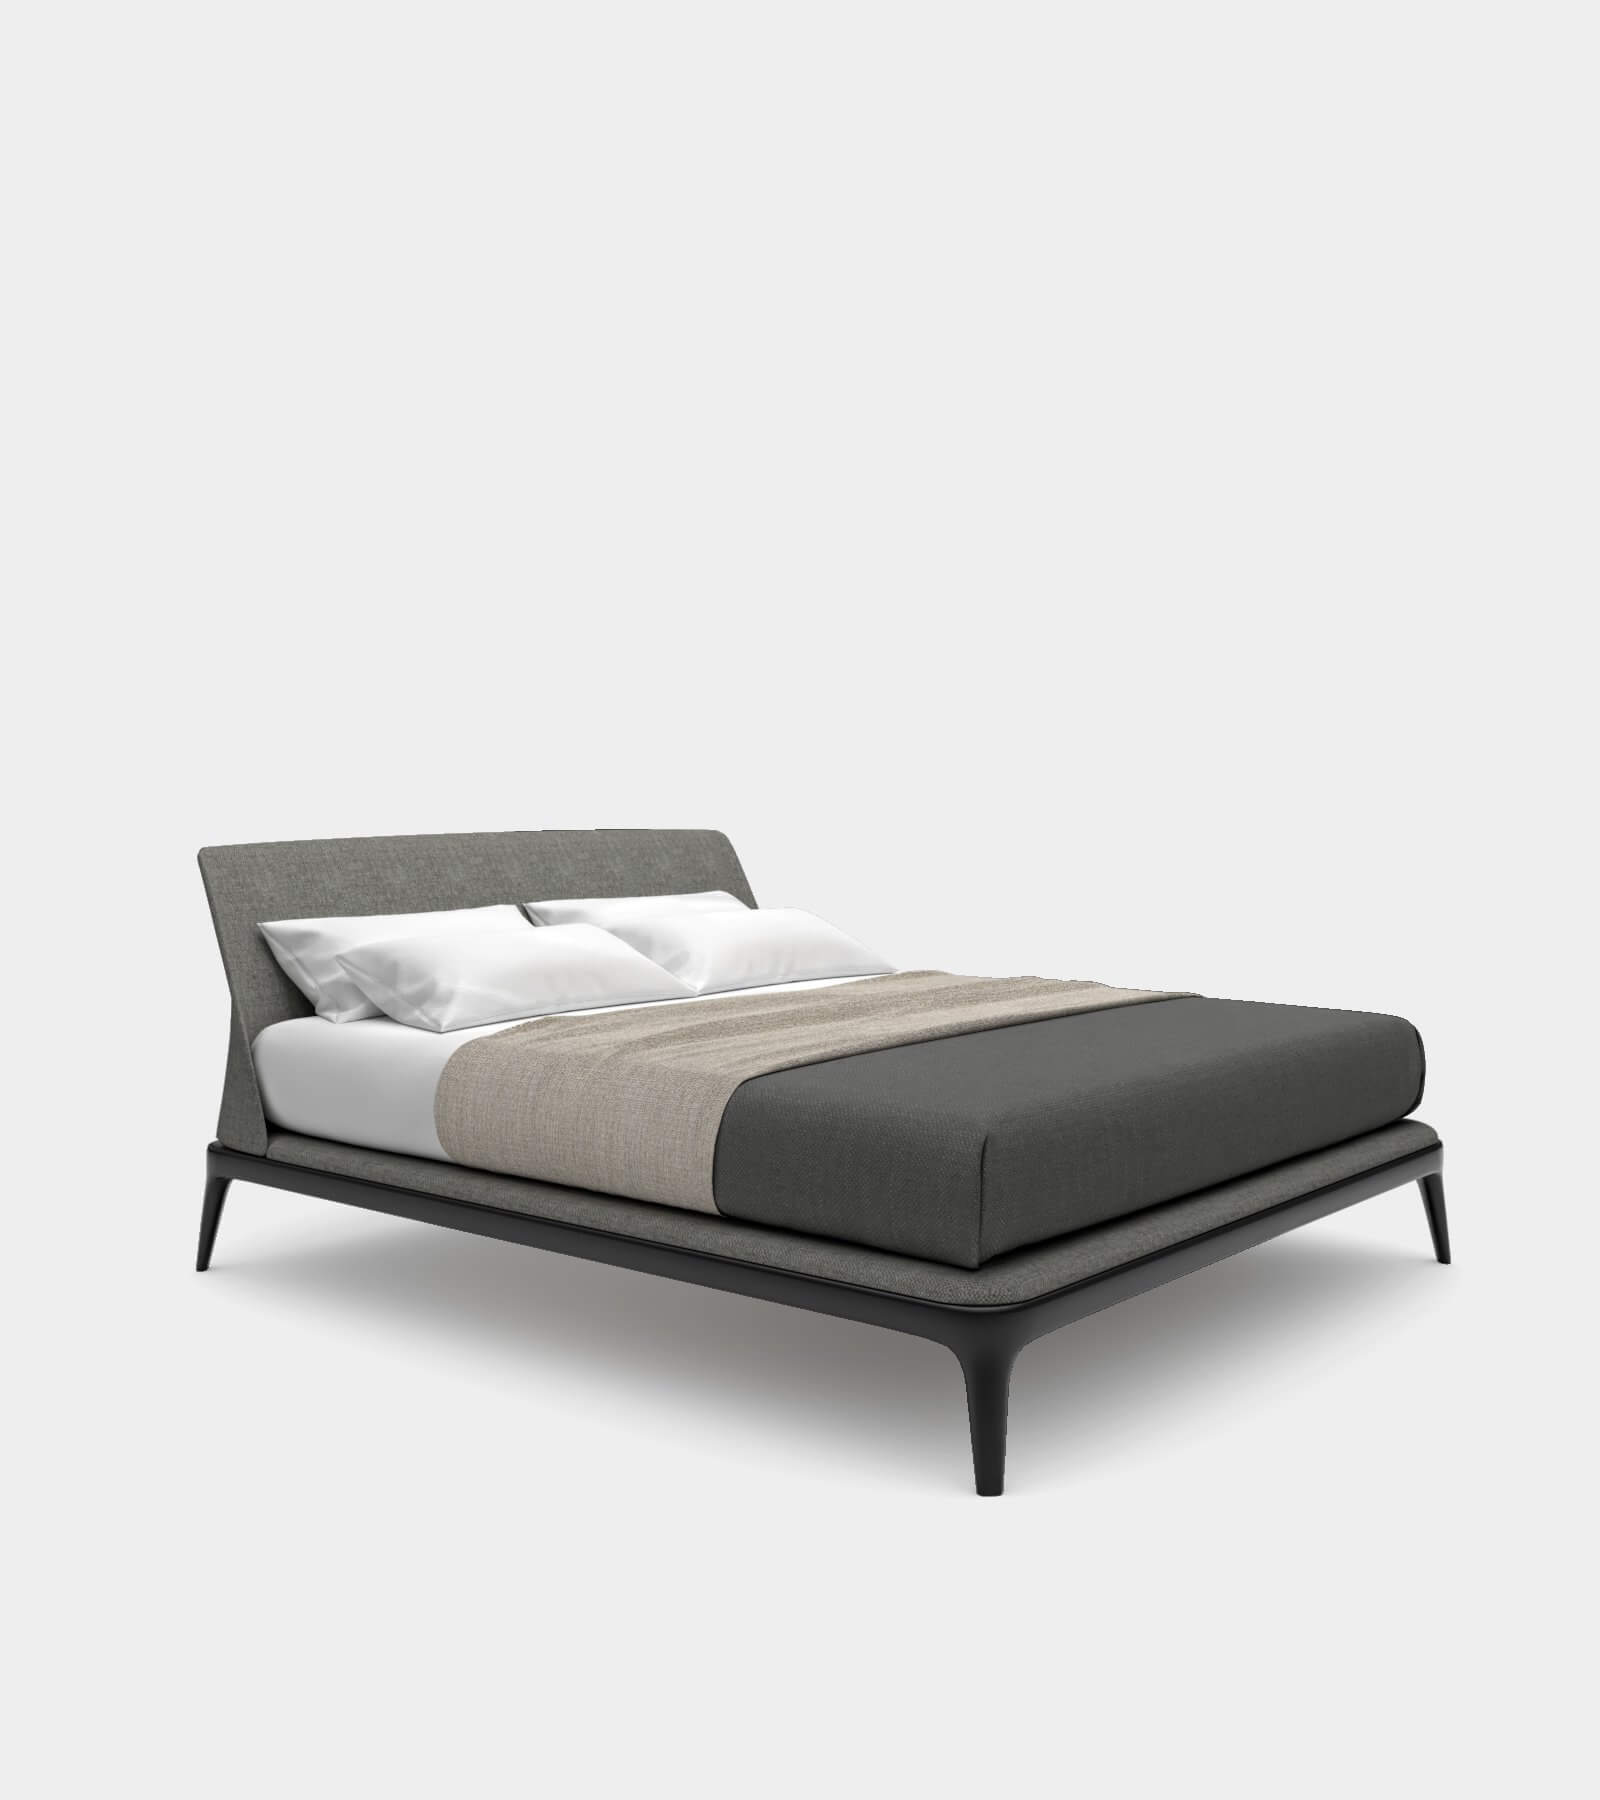 Modern double bed with bedhead--1 3D Model